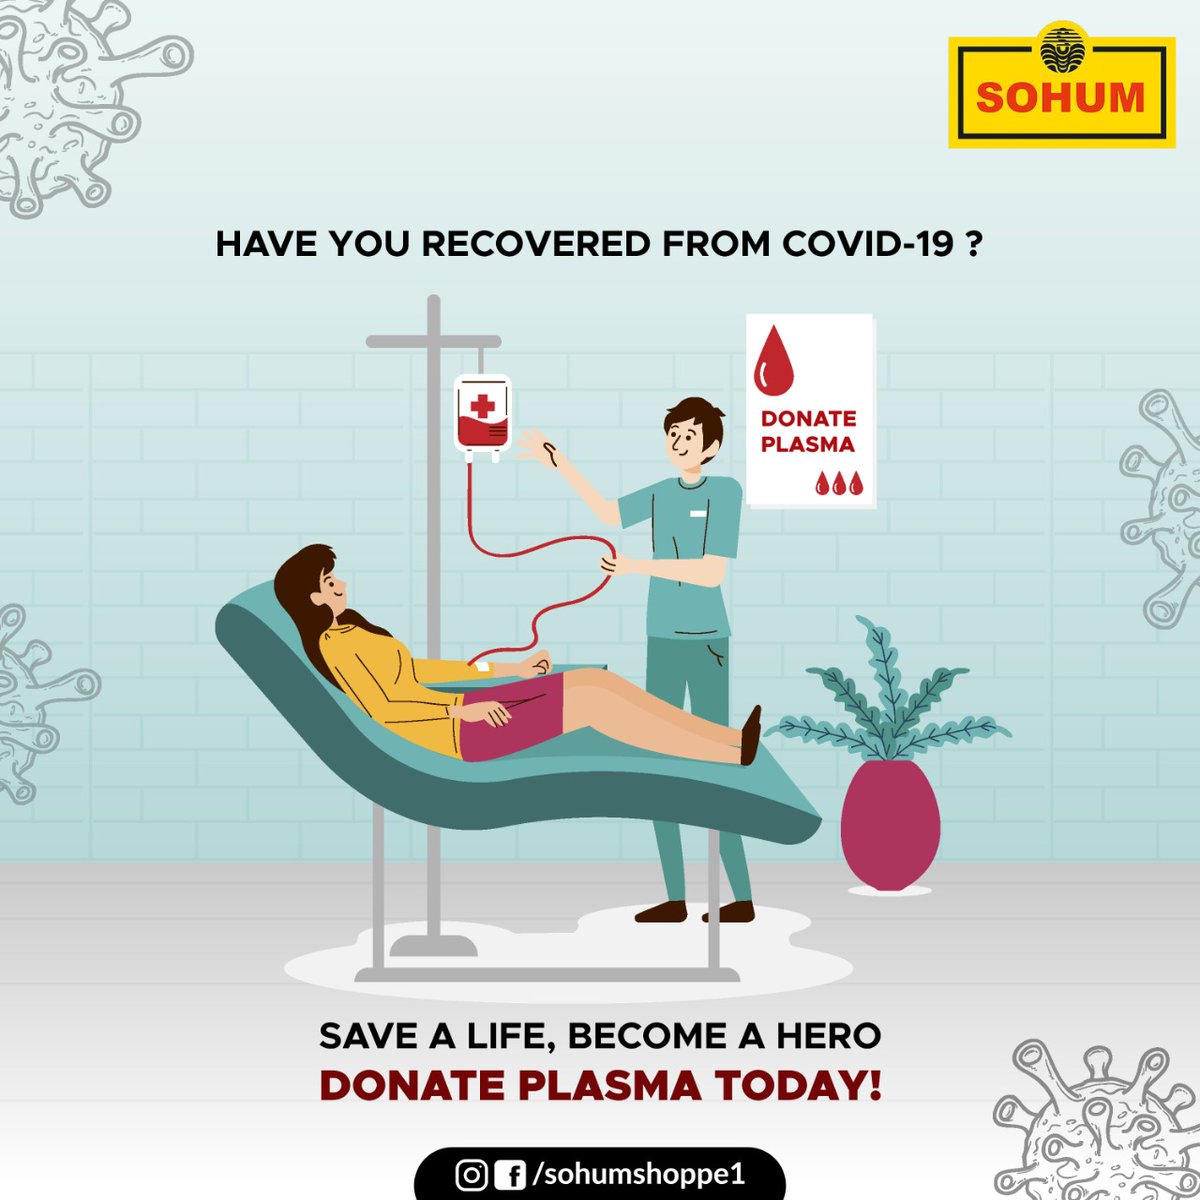 To all those brave ones who have successfully fought #Covid_19, the antibodies in your plasma can help others fight the deadly virus. Come forward and become a hero. Donate Plasma & Save Lives! #SohumShoppe #SohumEmporia